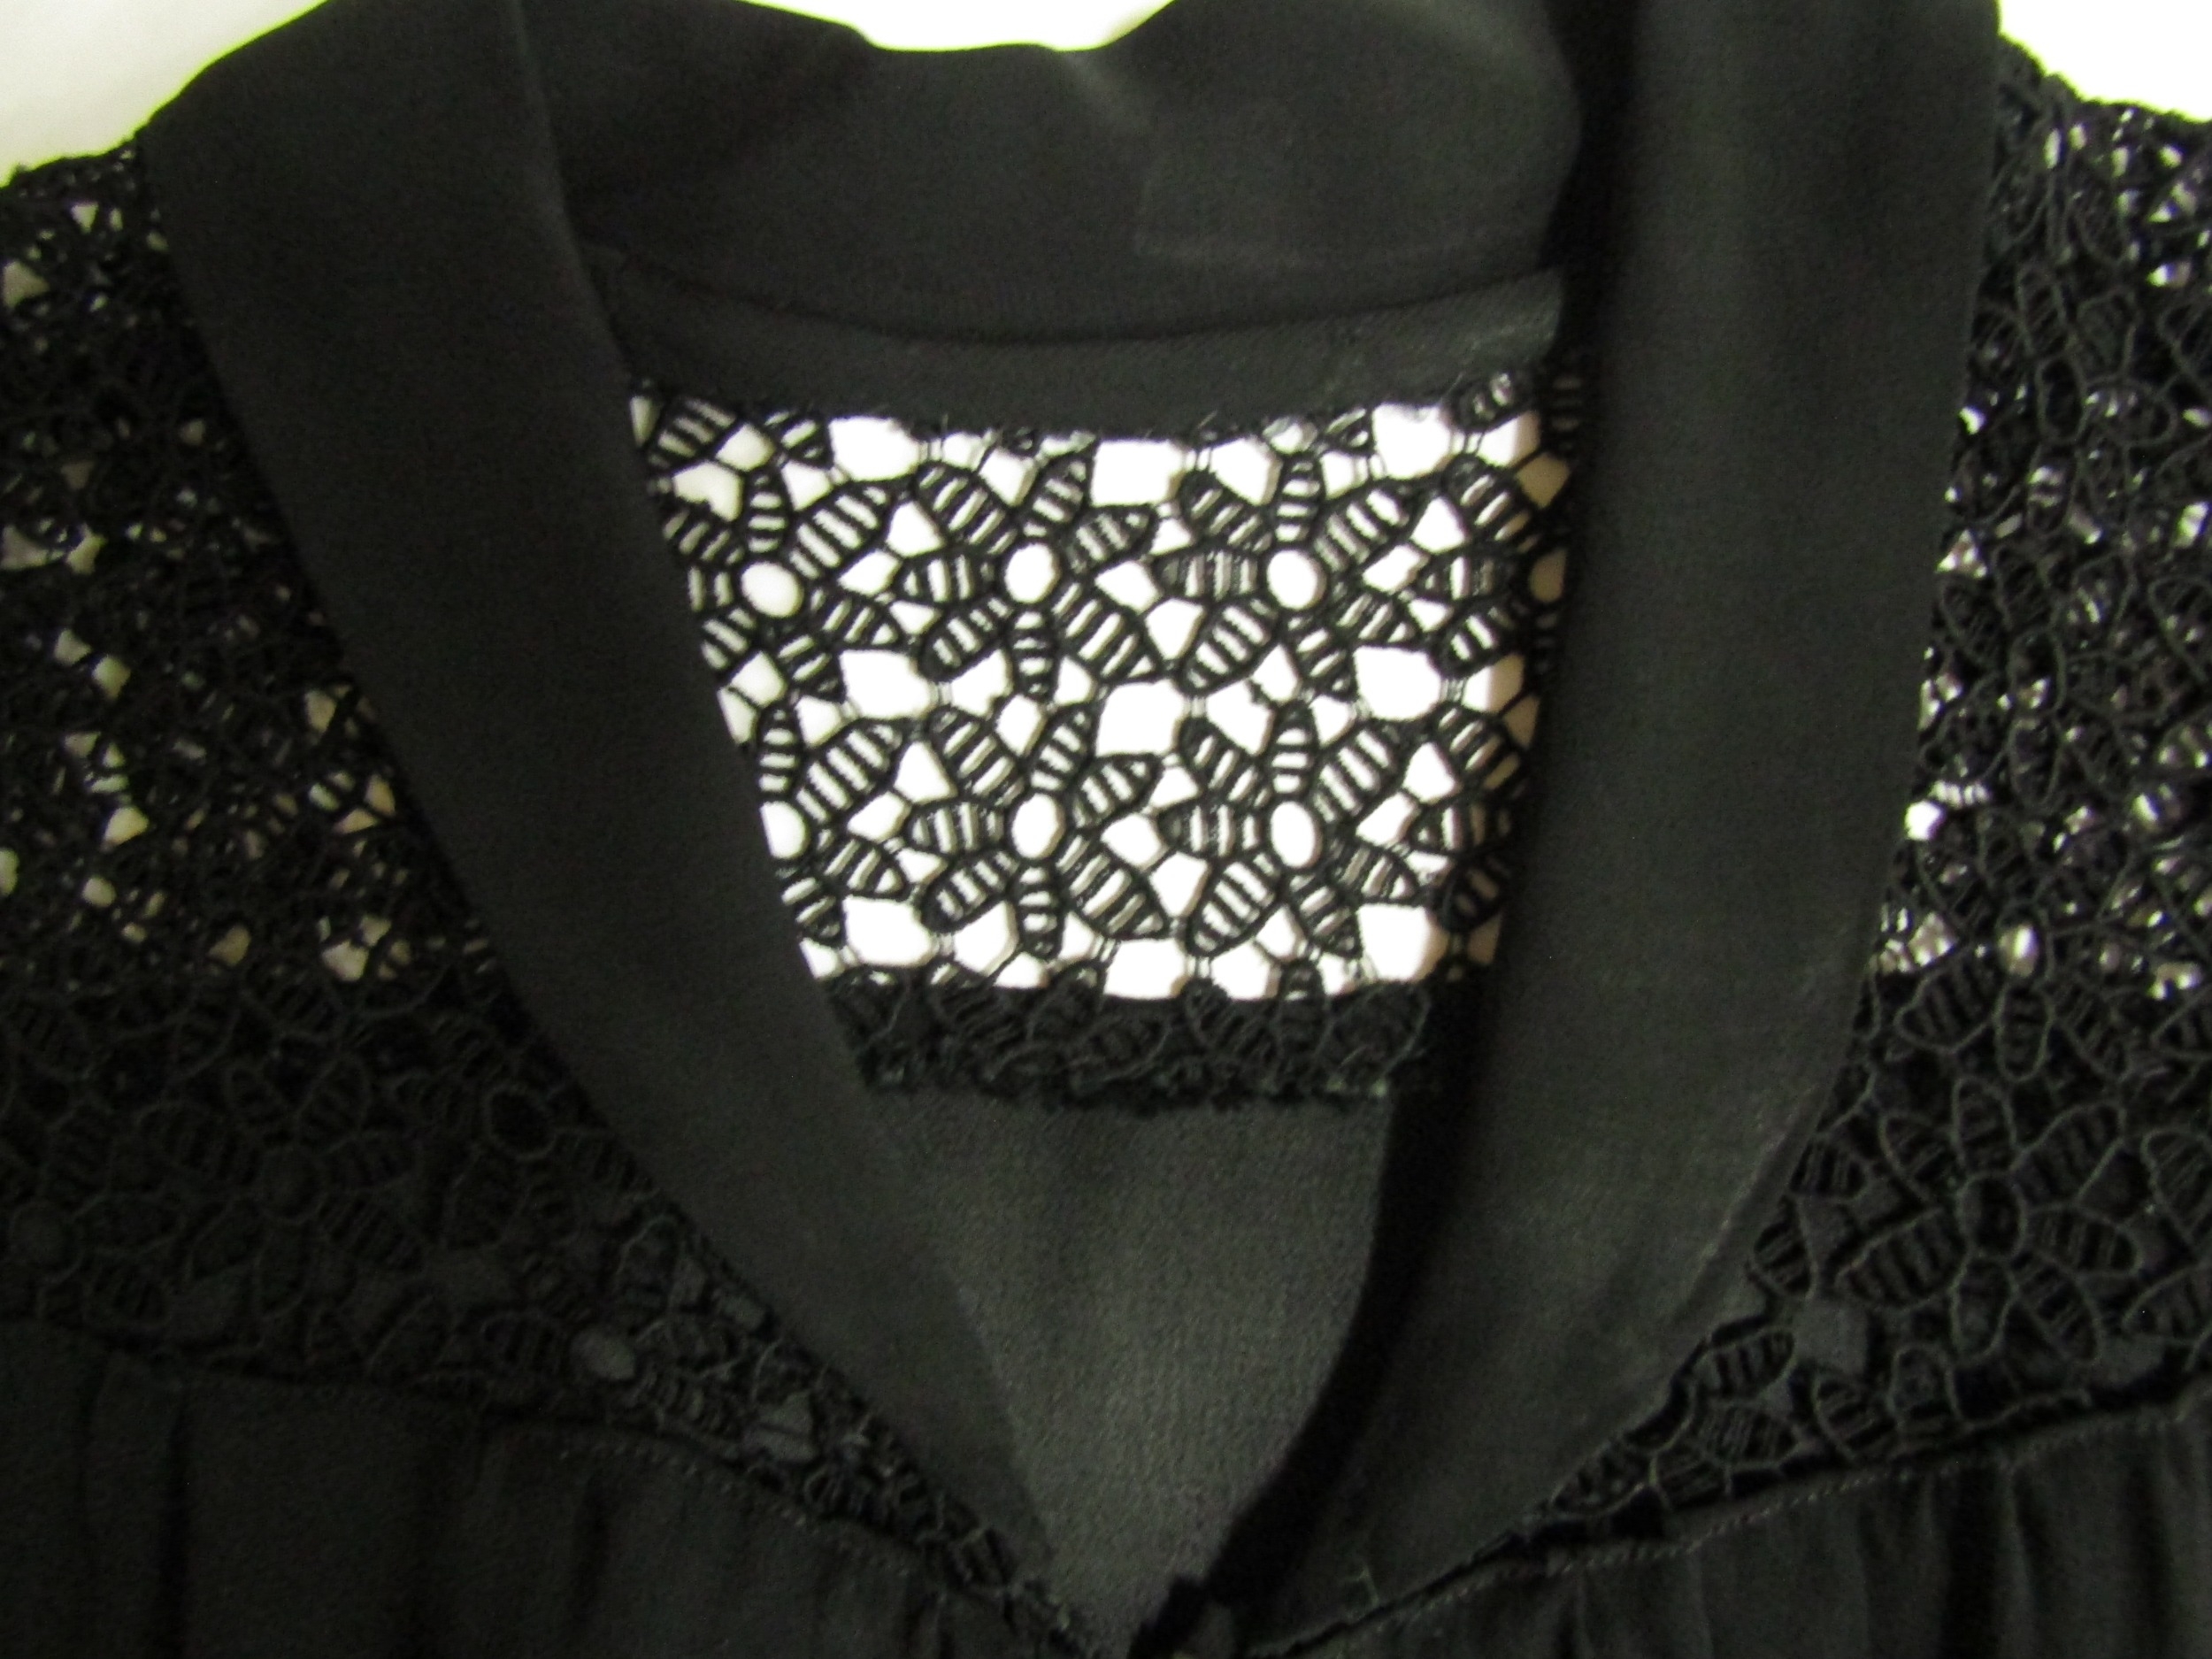 A 1940's silk crepe dress, the yoke has open lacework detail, with a popper front fastening with a - Image 3 of 4